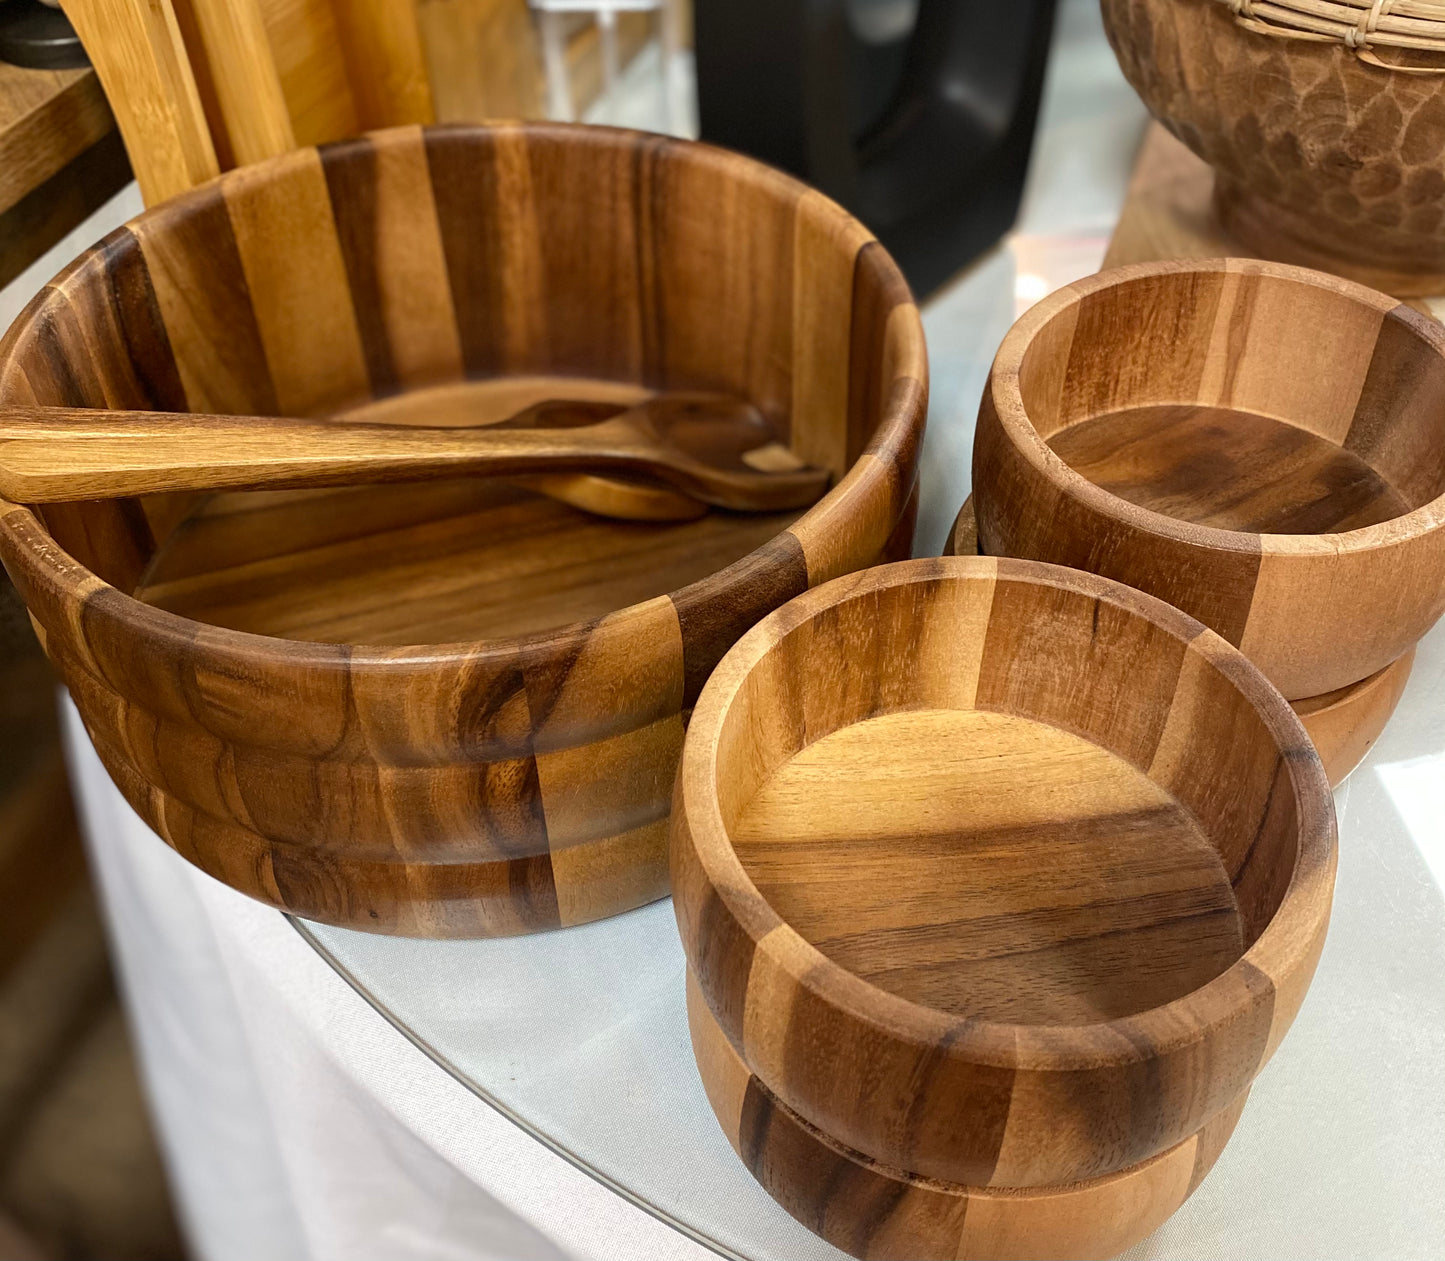 7 Piece Wooden Salad Bowl with Servers and Bowls